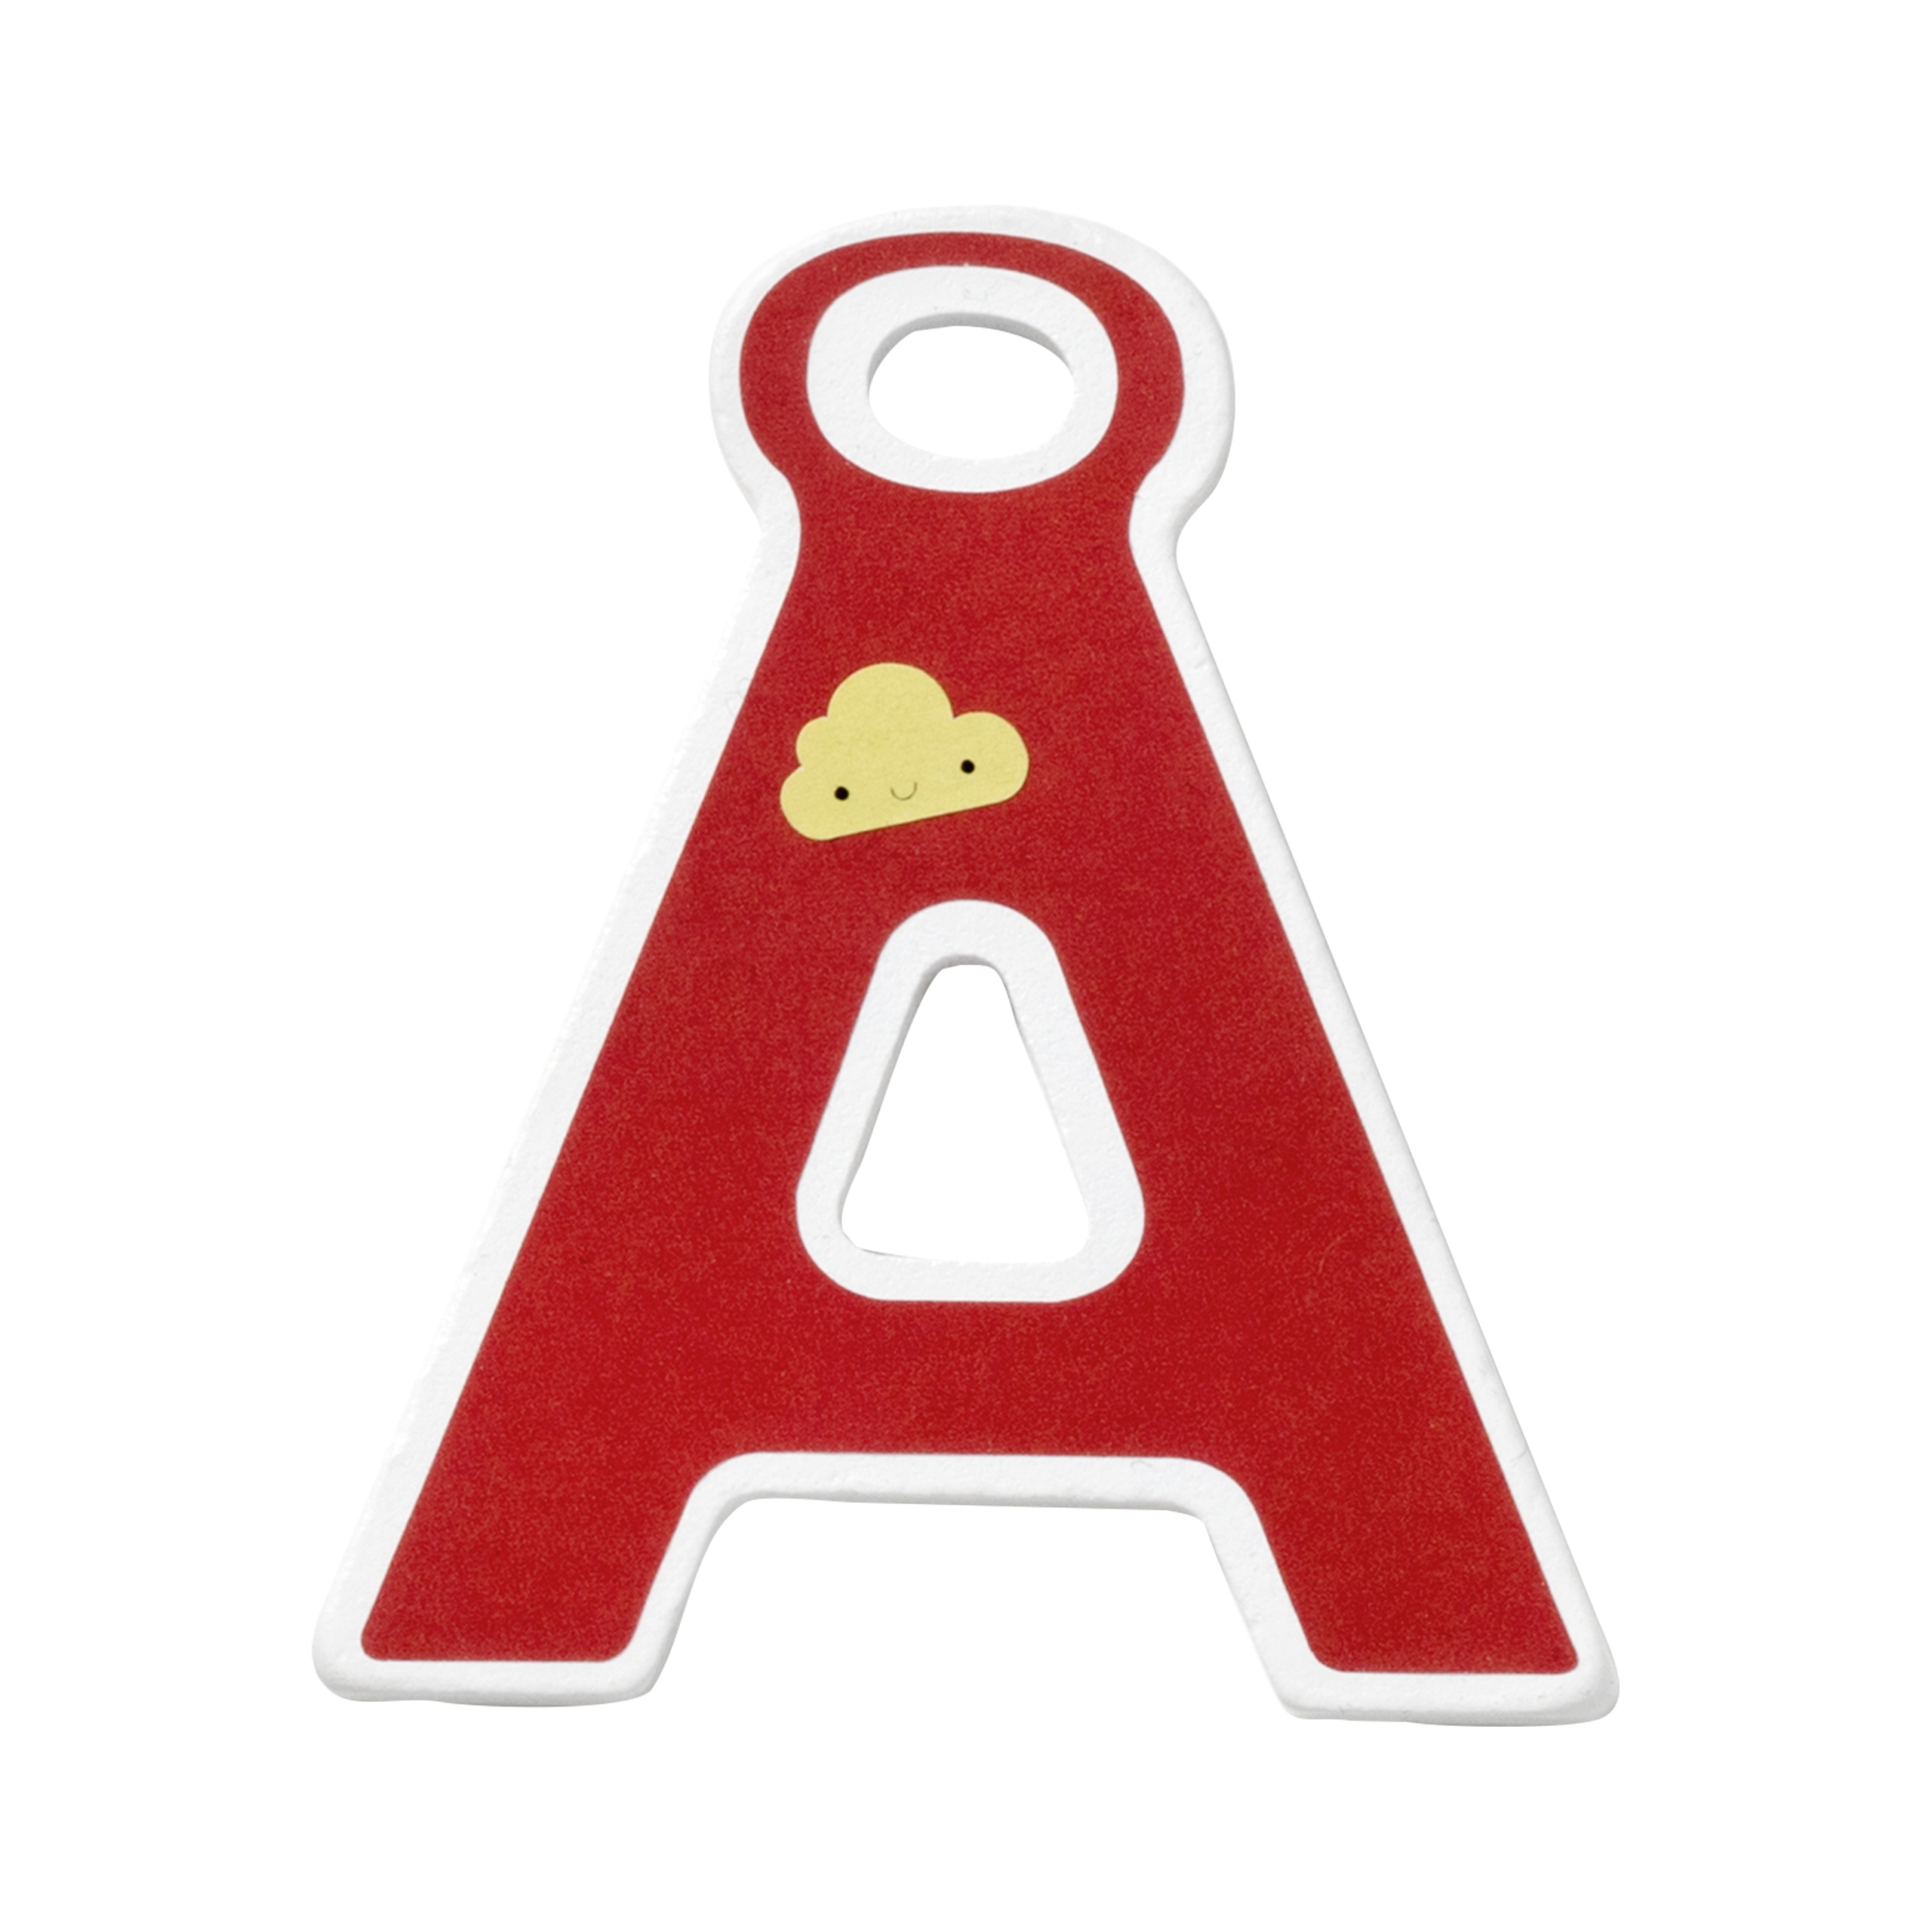 Arts and Craft micki å - decorative letter & mix and match stickers